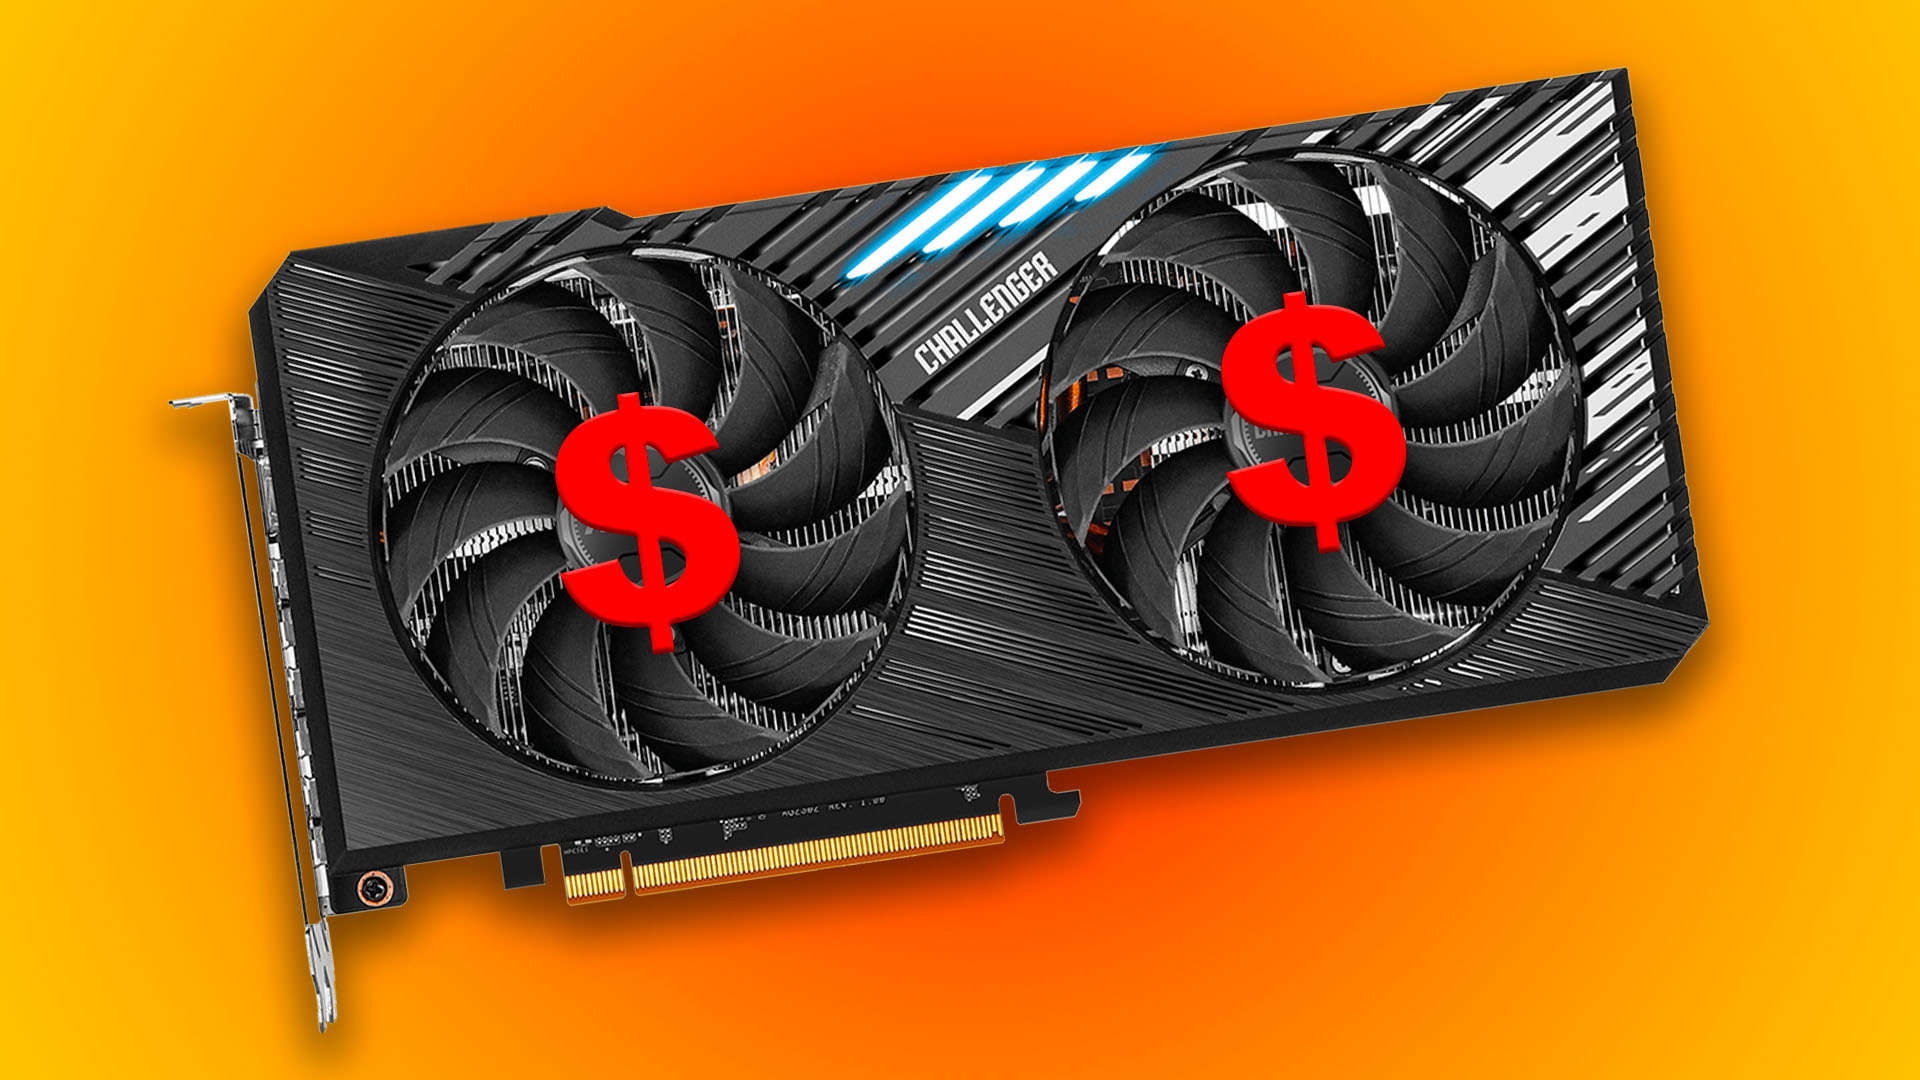 Grab this fantastic AMD GPU for its lowest price yet